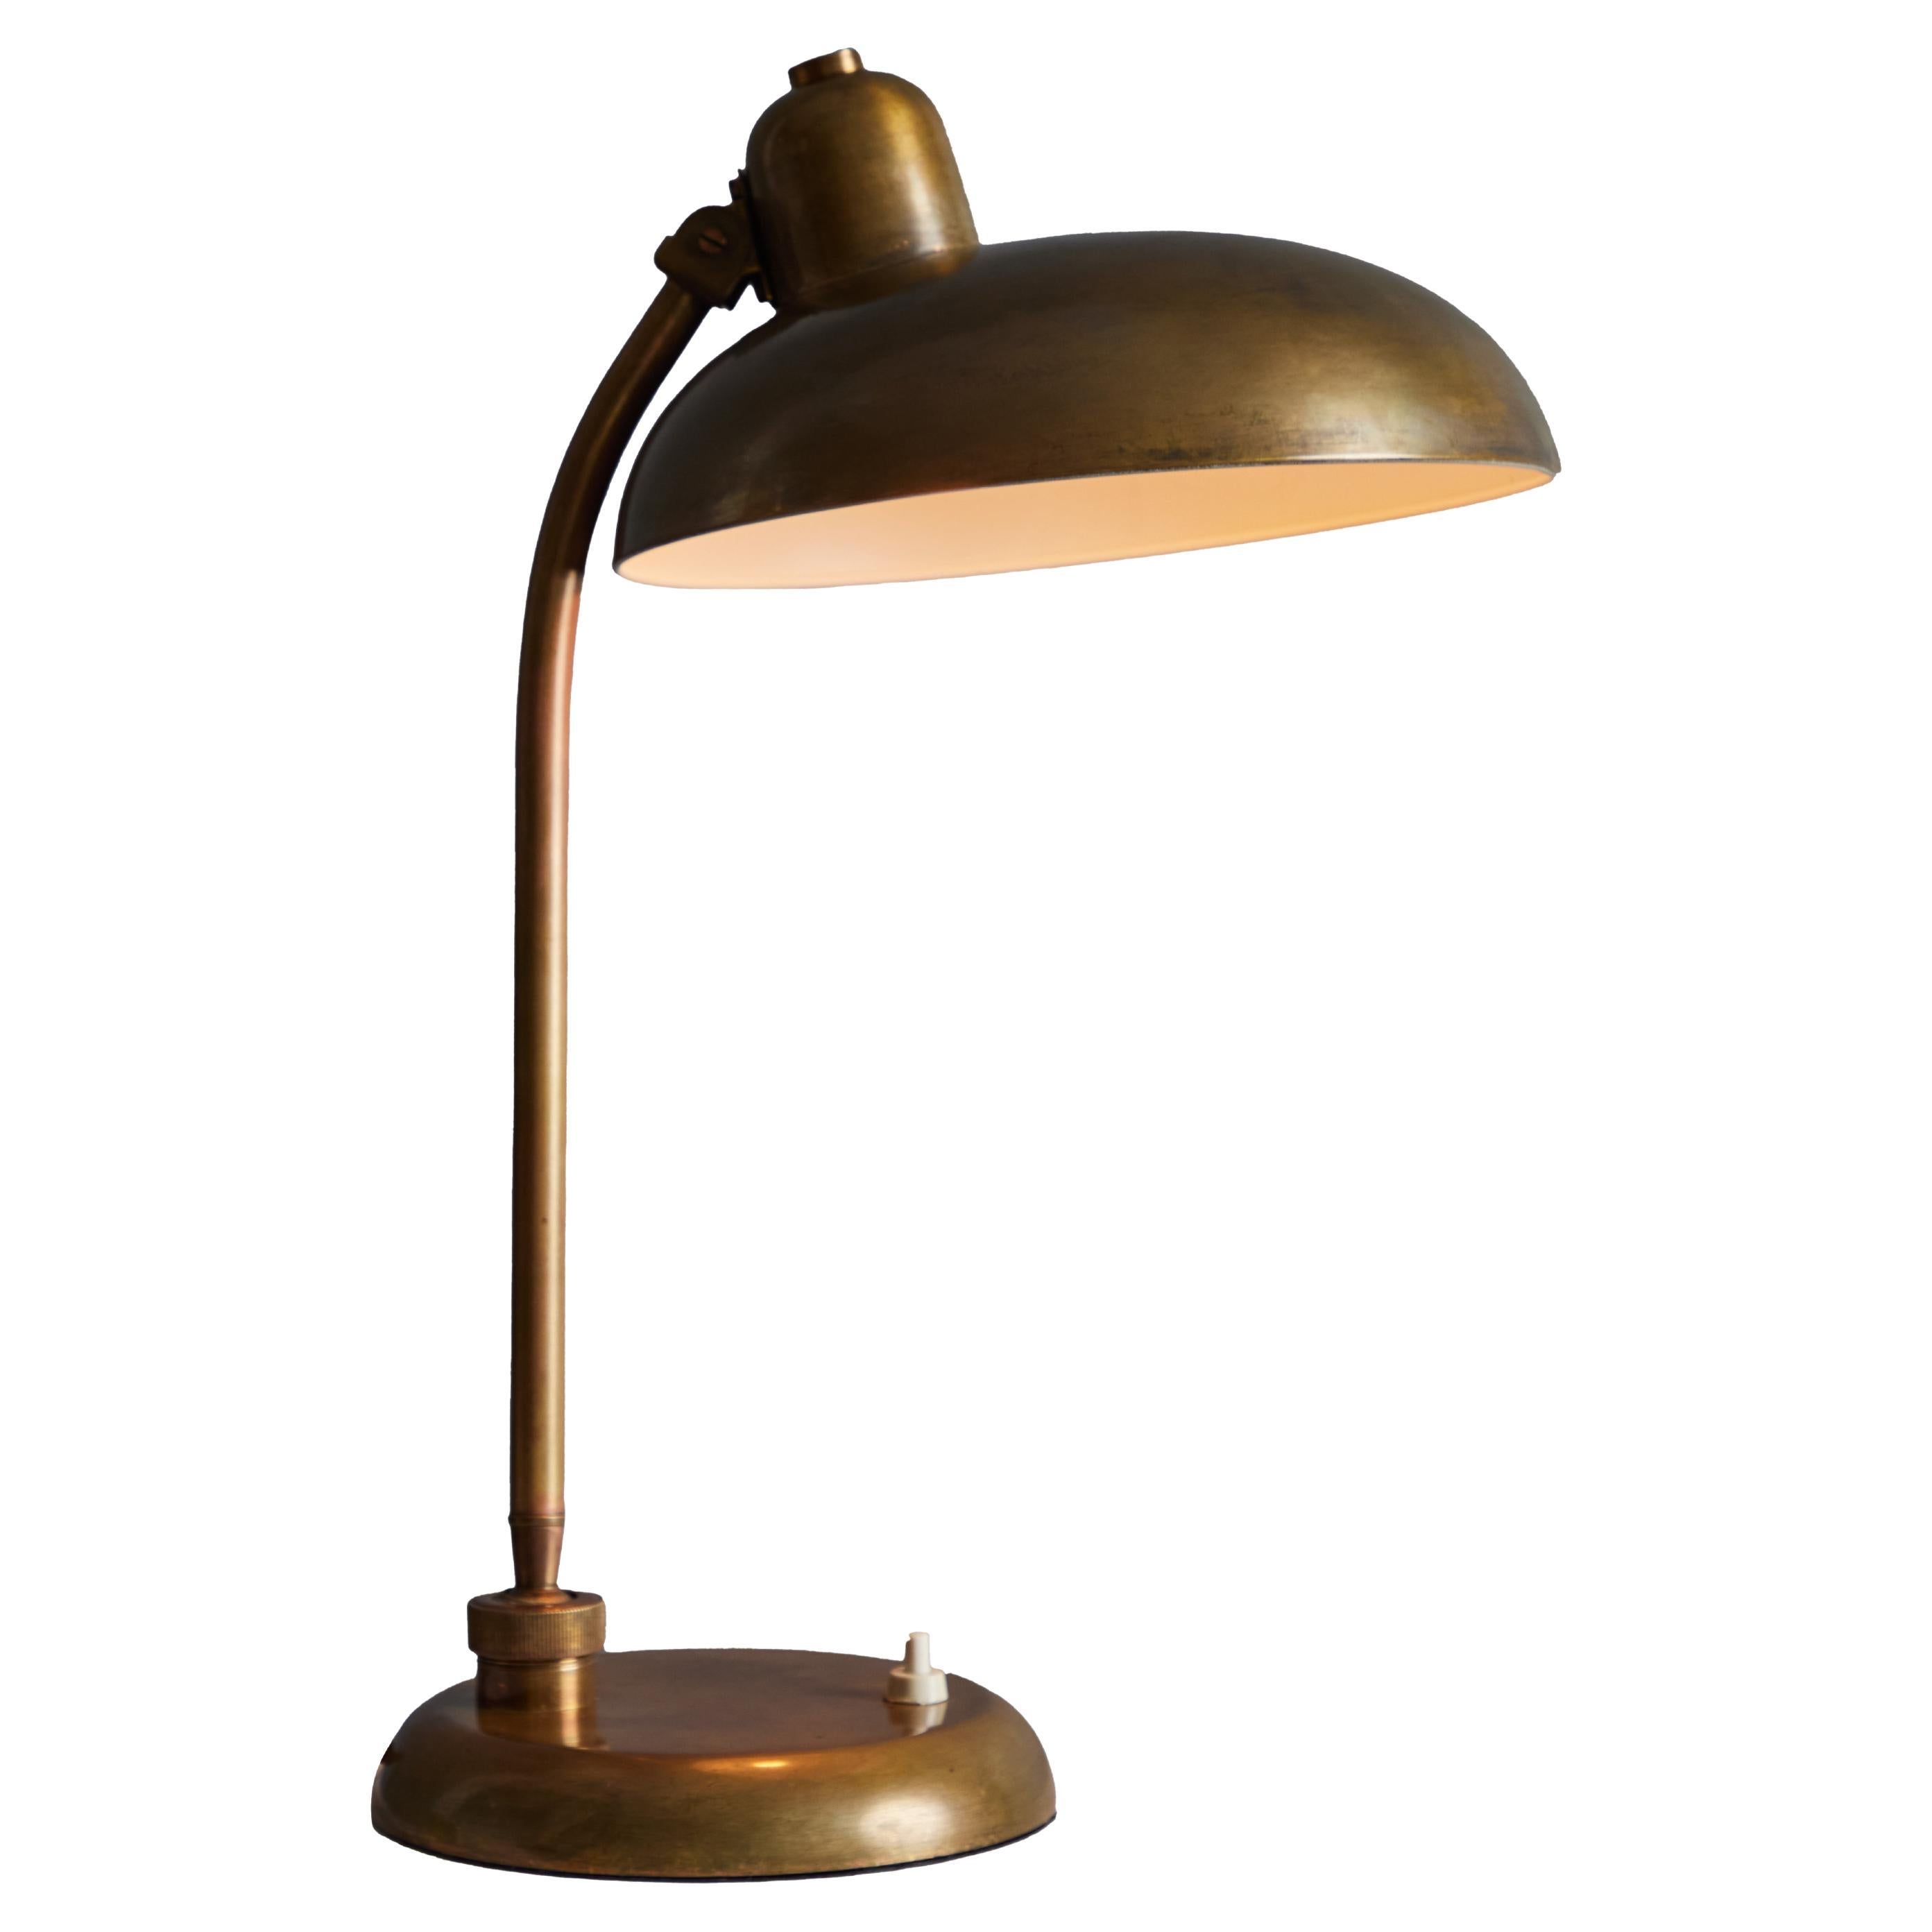 1940s Giovanni Michelucci Brass Ministerial Table Lamp for Lariolux For Sale